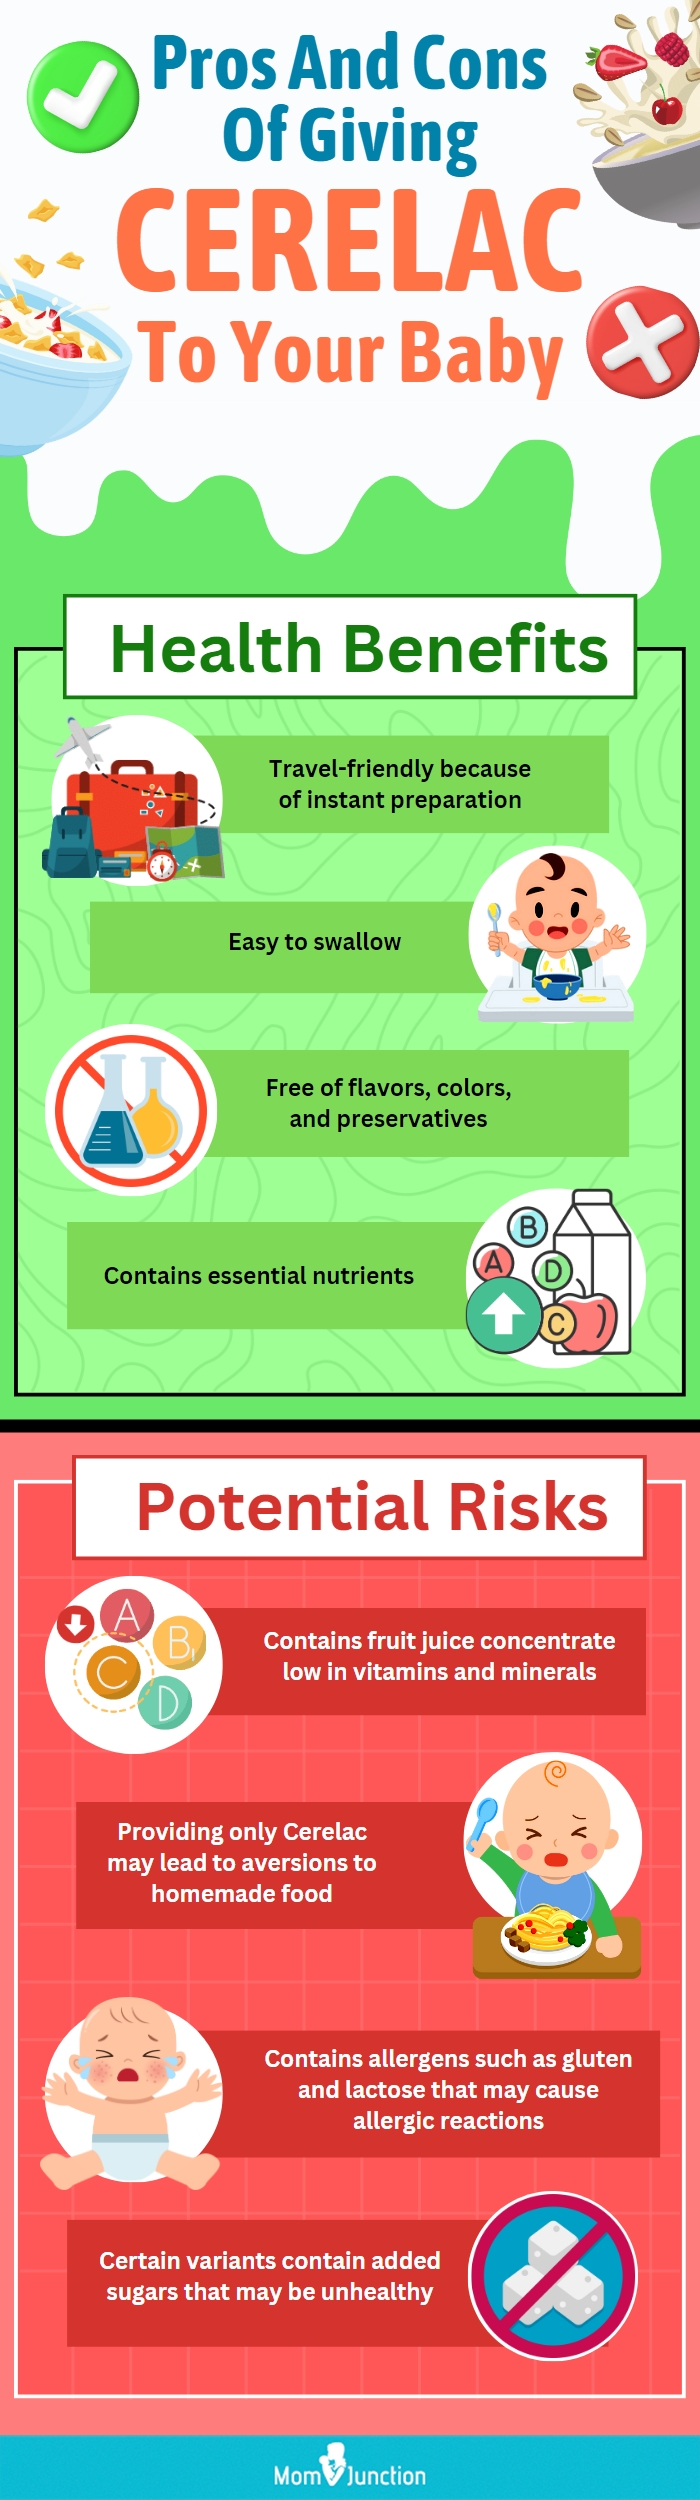 pros and cons of giving cerelac to your baby (infographic)